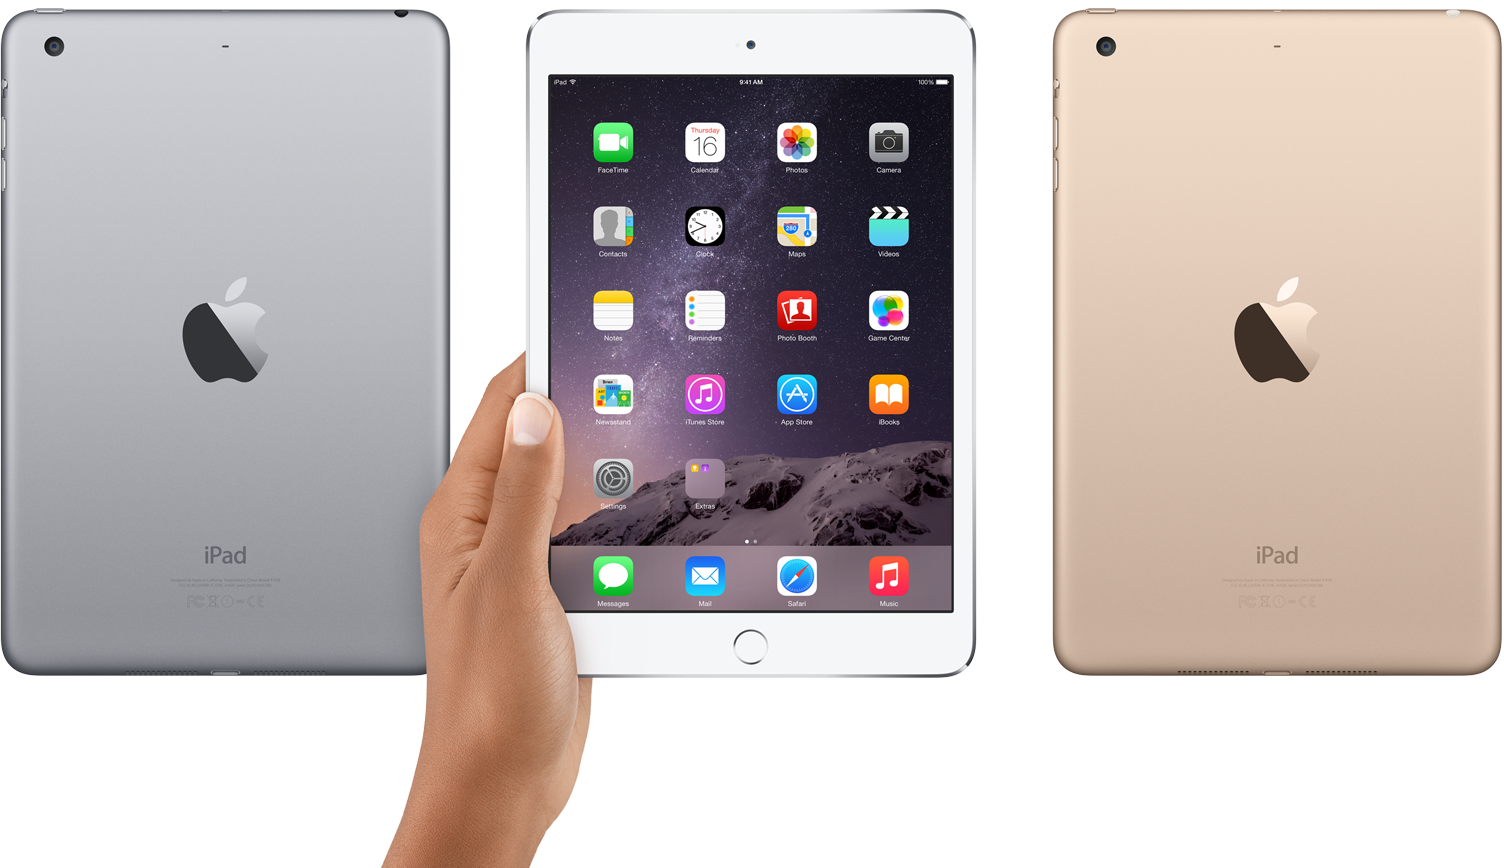 At the left part of the image is rear view of a gray iPad mini 3 at the left, in the middle is front view of an iPad mini 3 with a hand holding the edge, at the right is rear view of a gold iPad mini 3.